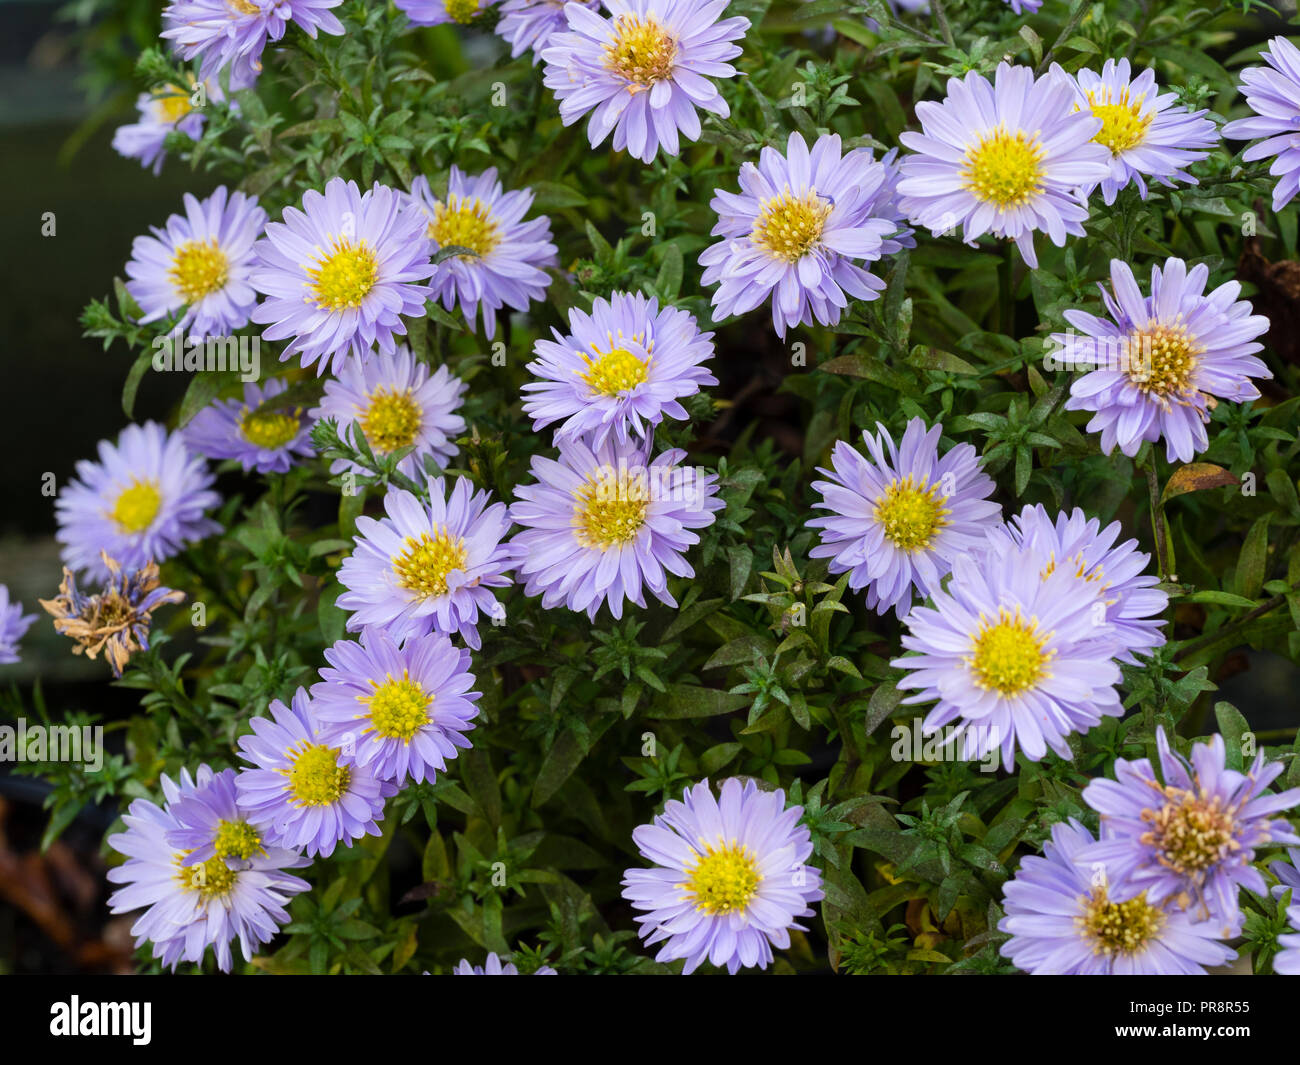 Blue ray petals and yellow centre of the autumn flowering, compact, perennial Aster x dumosus hybrid, Aster Autumn Jewels 'Aqua Compact' Stock Photo